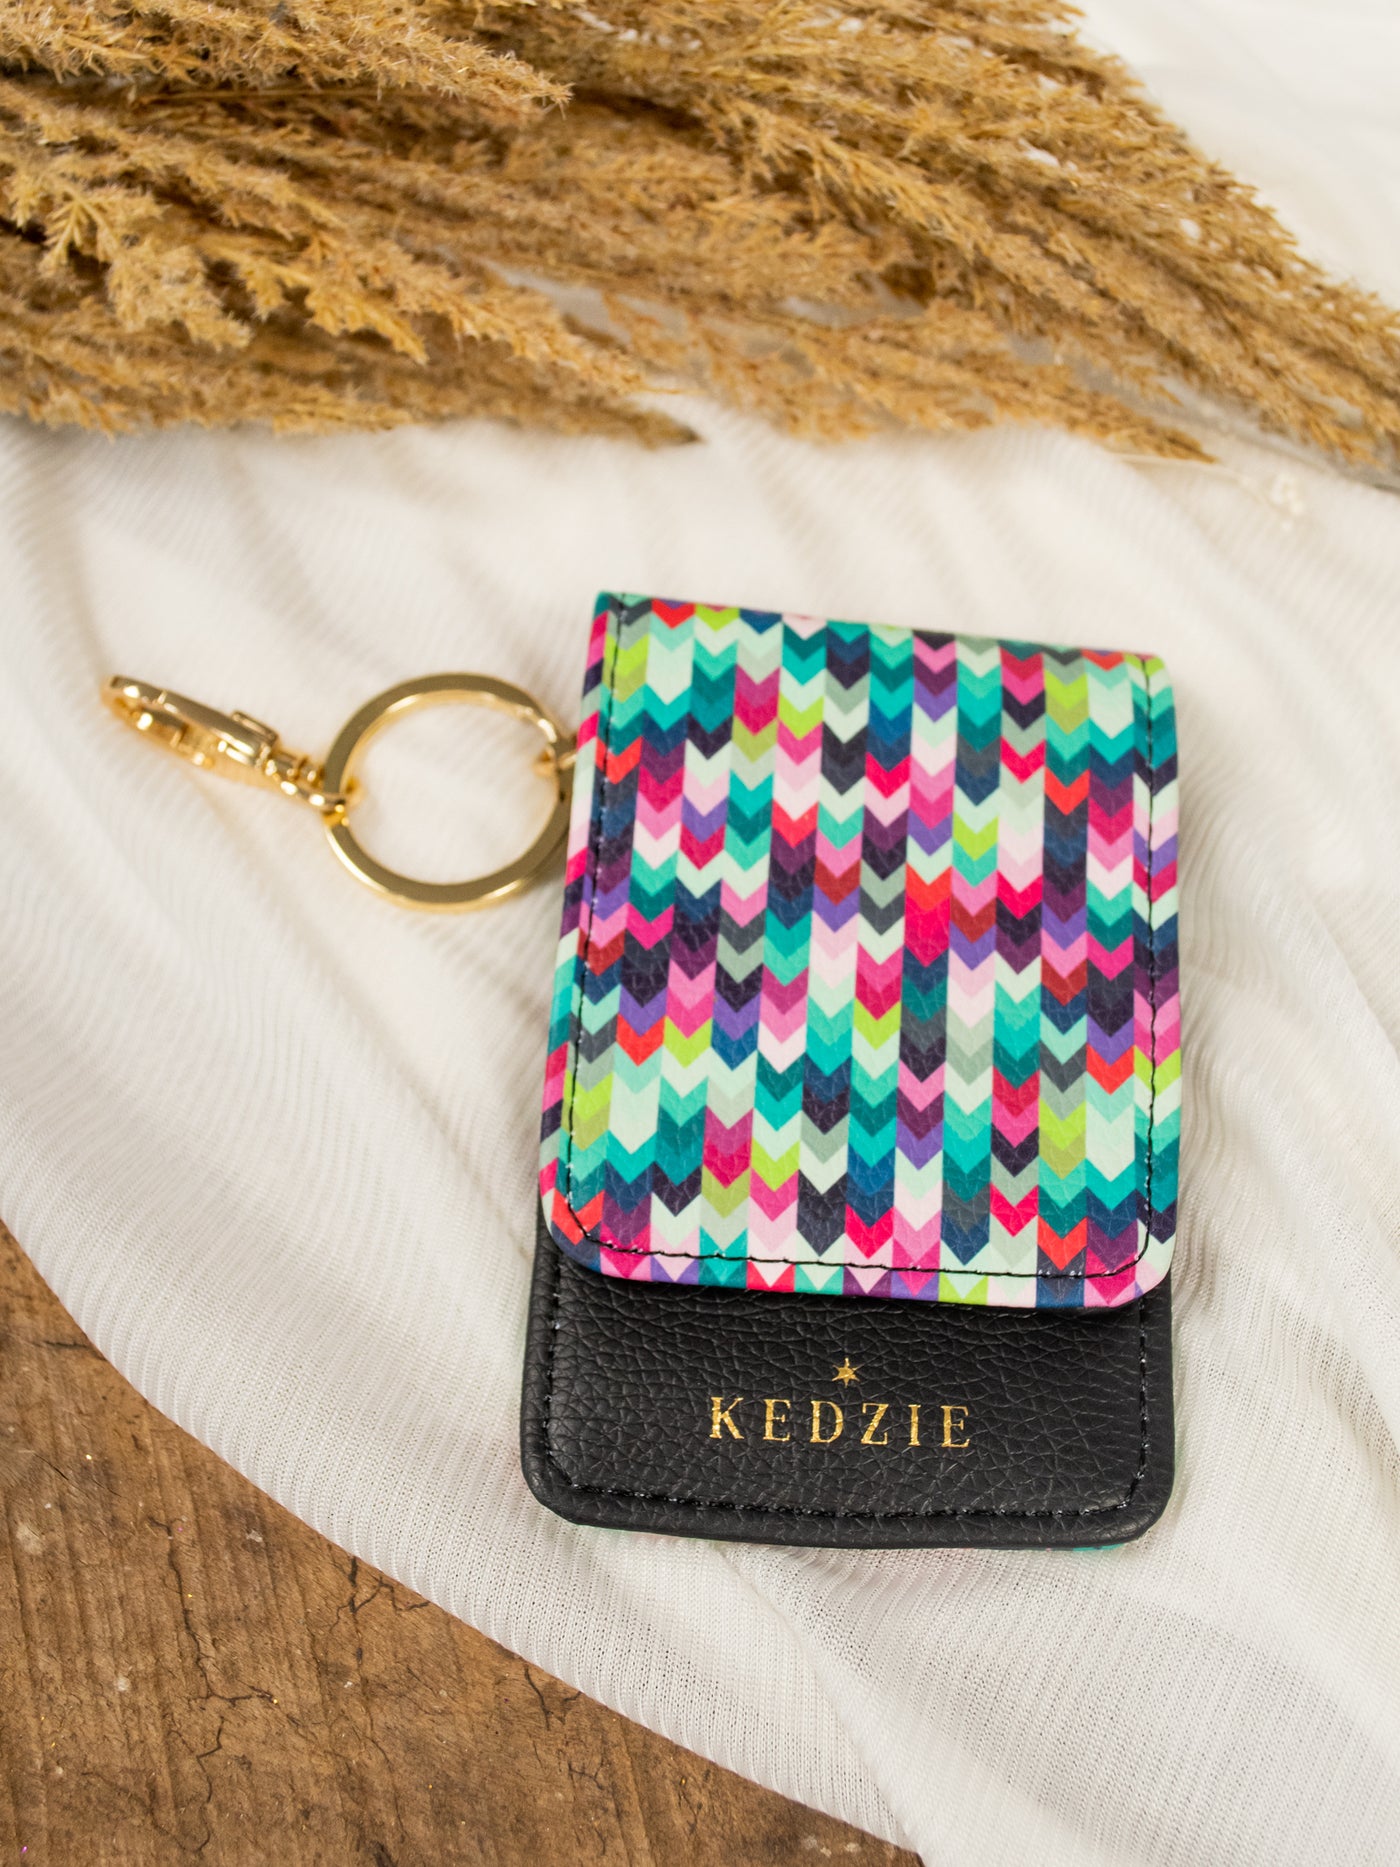 A multicolor and black id holder keychain.